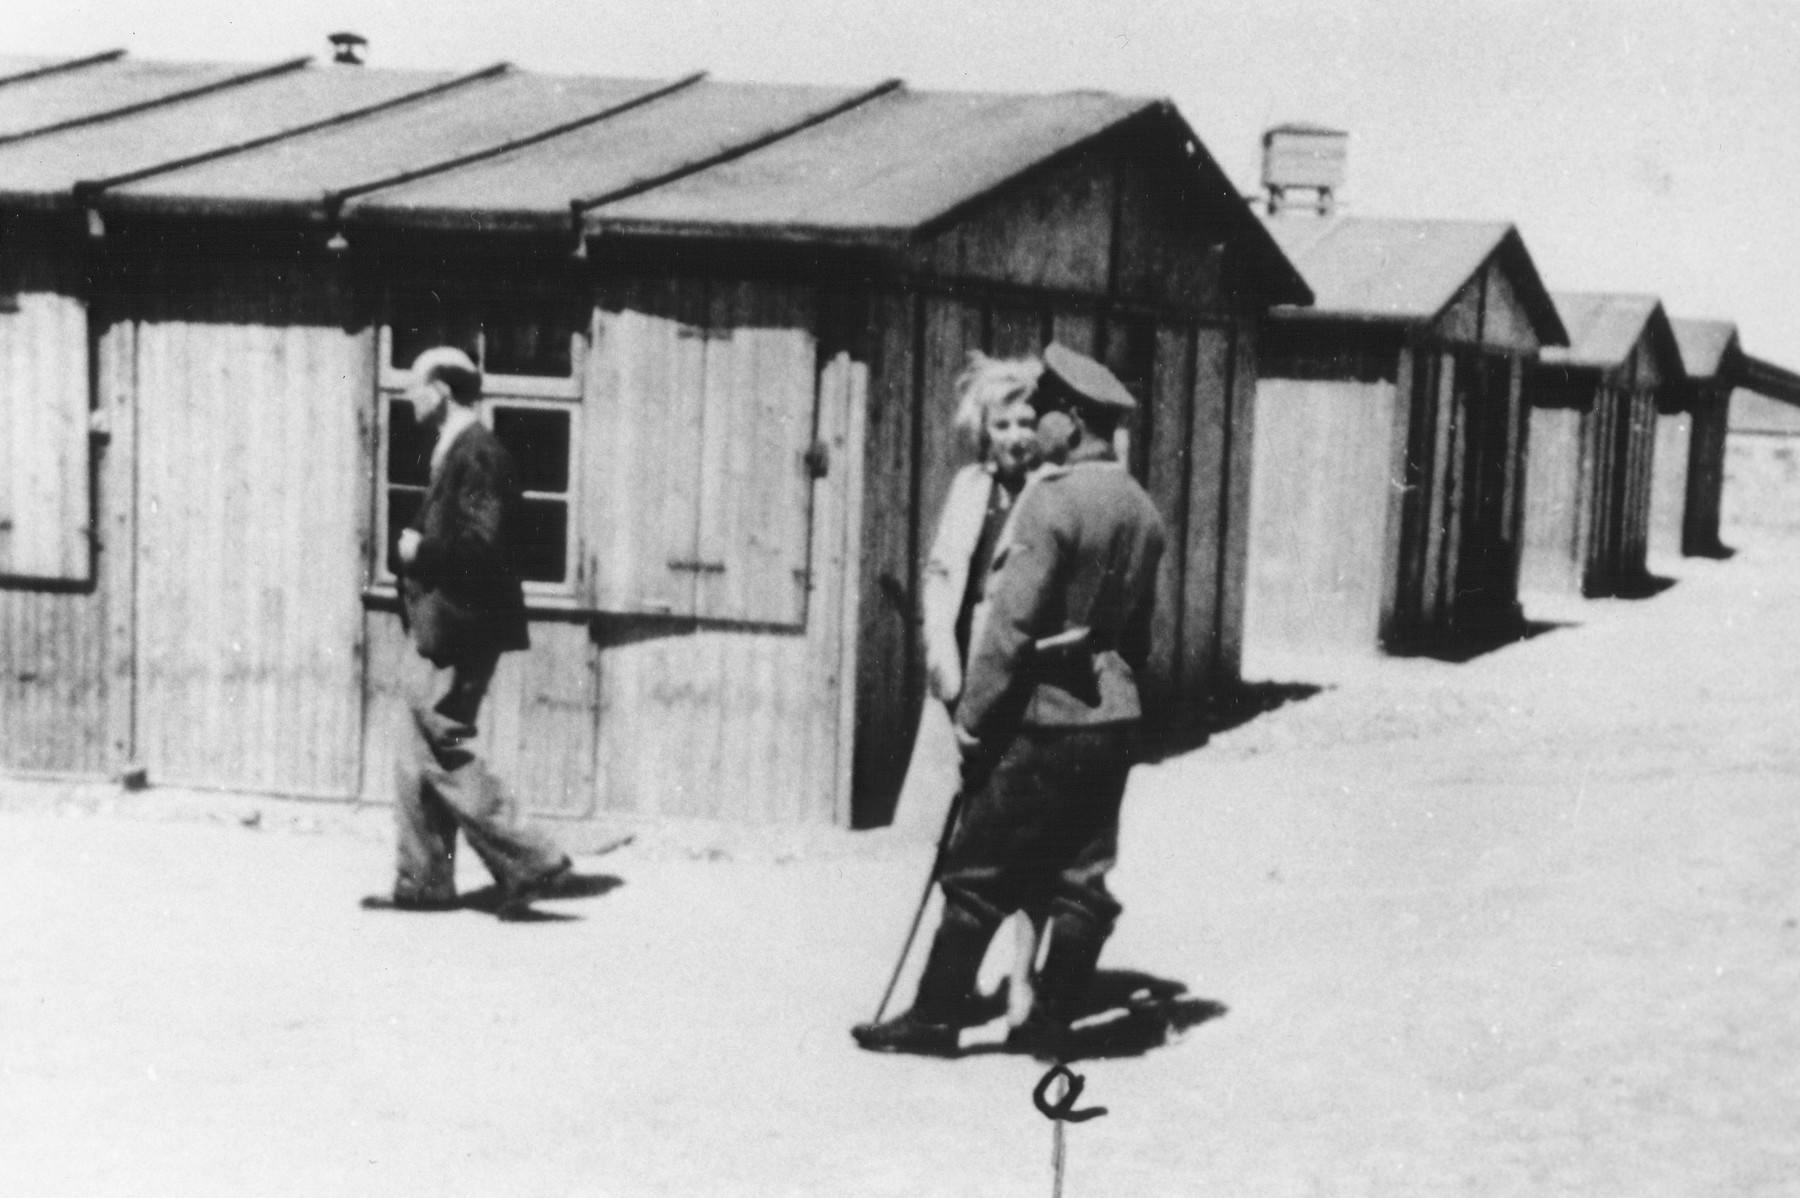 An SS officer identified as Lehnert converses with a woman on the main street of the residential camp in Trawniki.